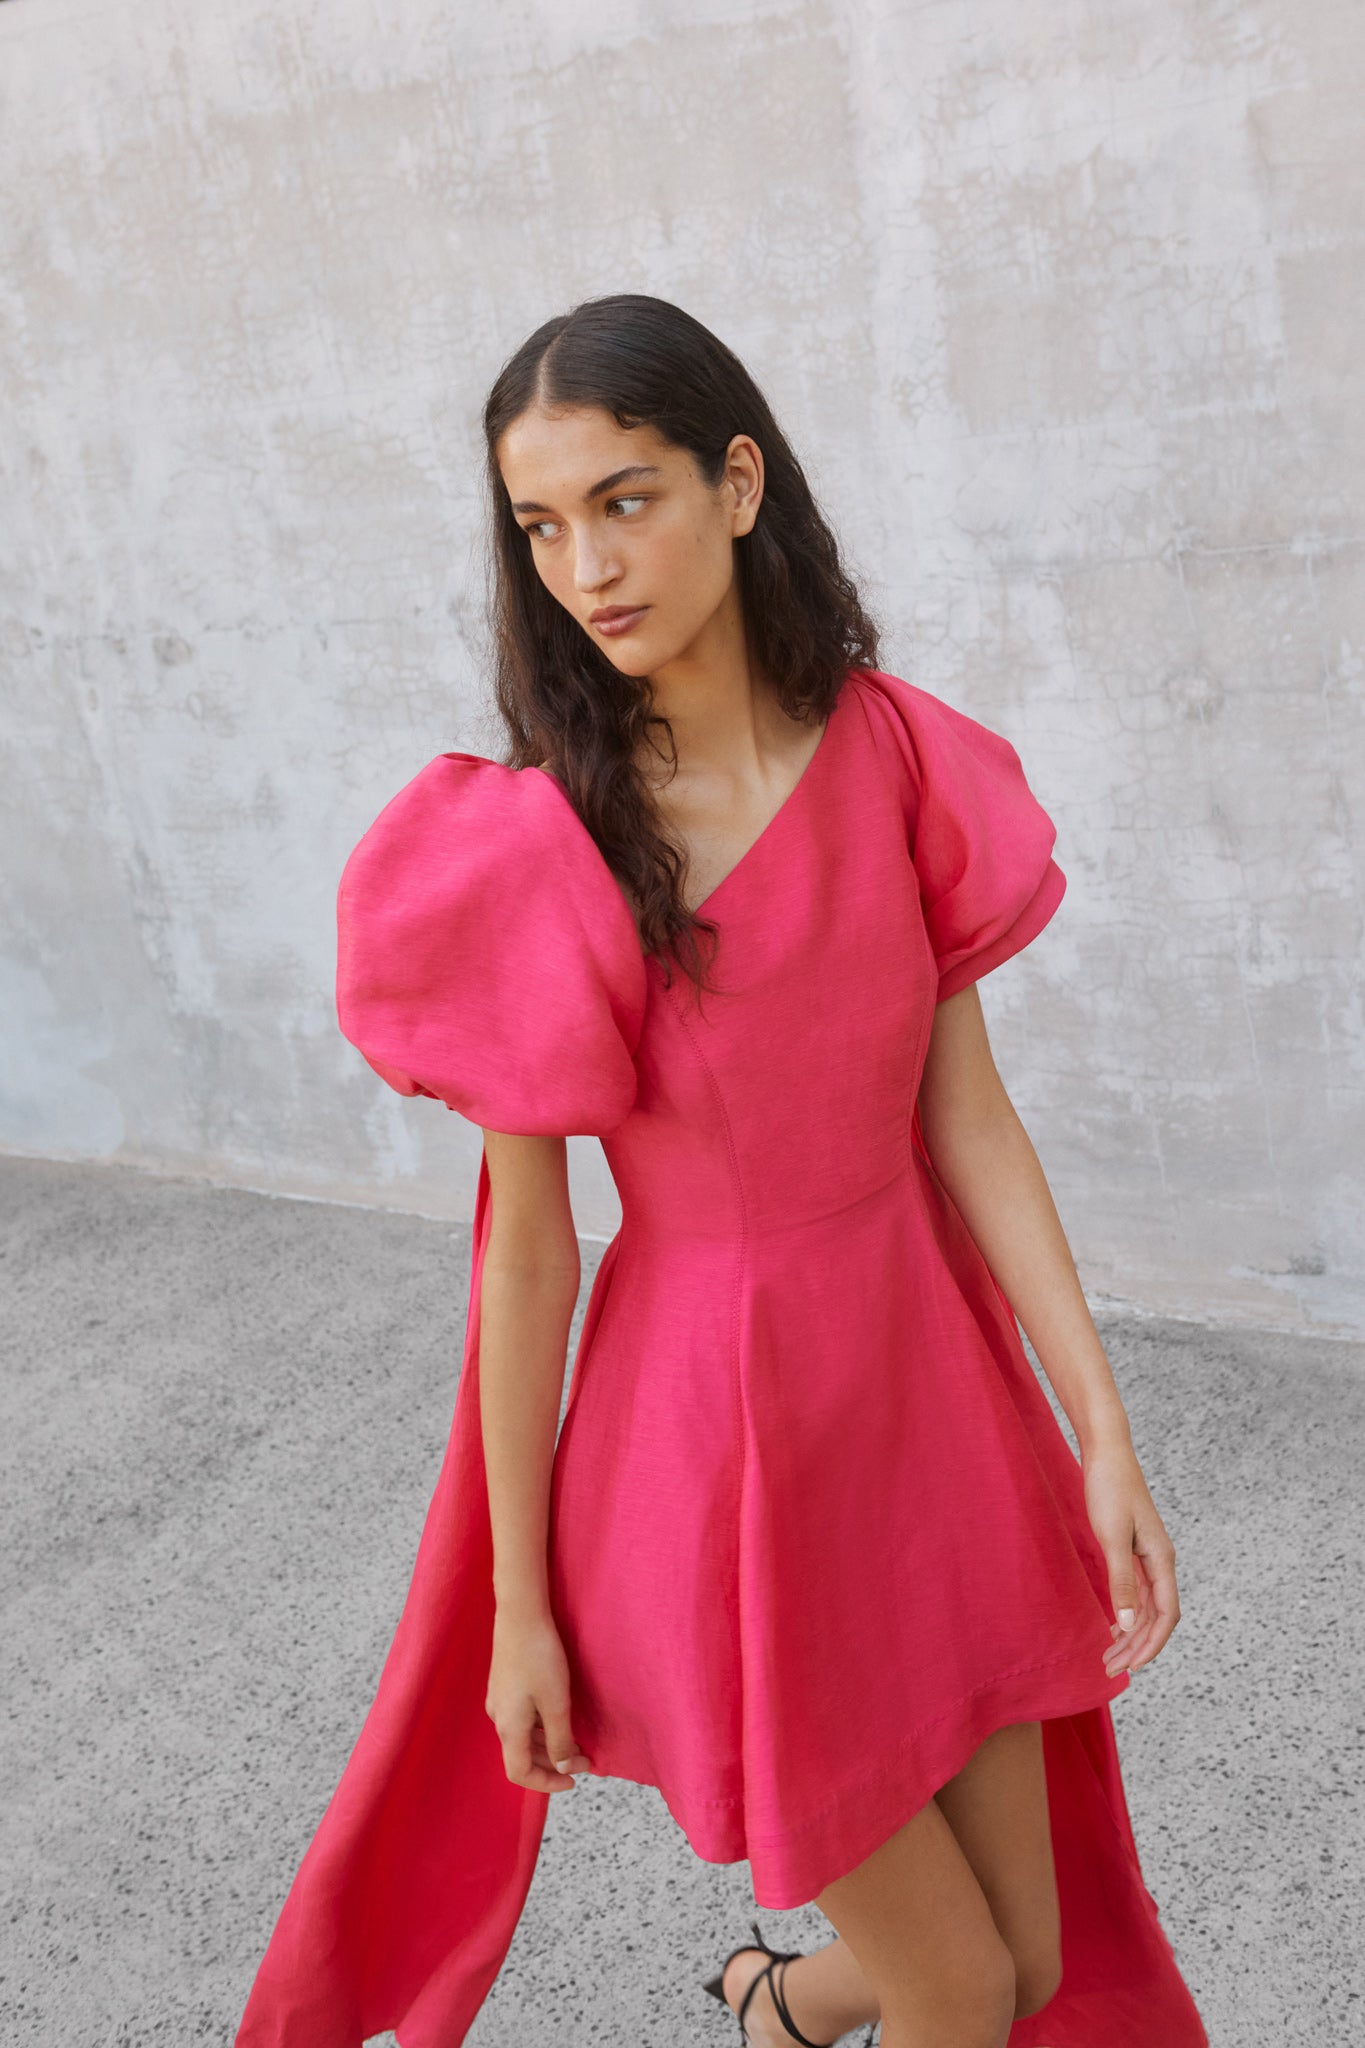 Sculptural Fit-And-Flare Dress - Women - Ready-to-Wear